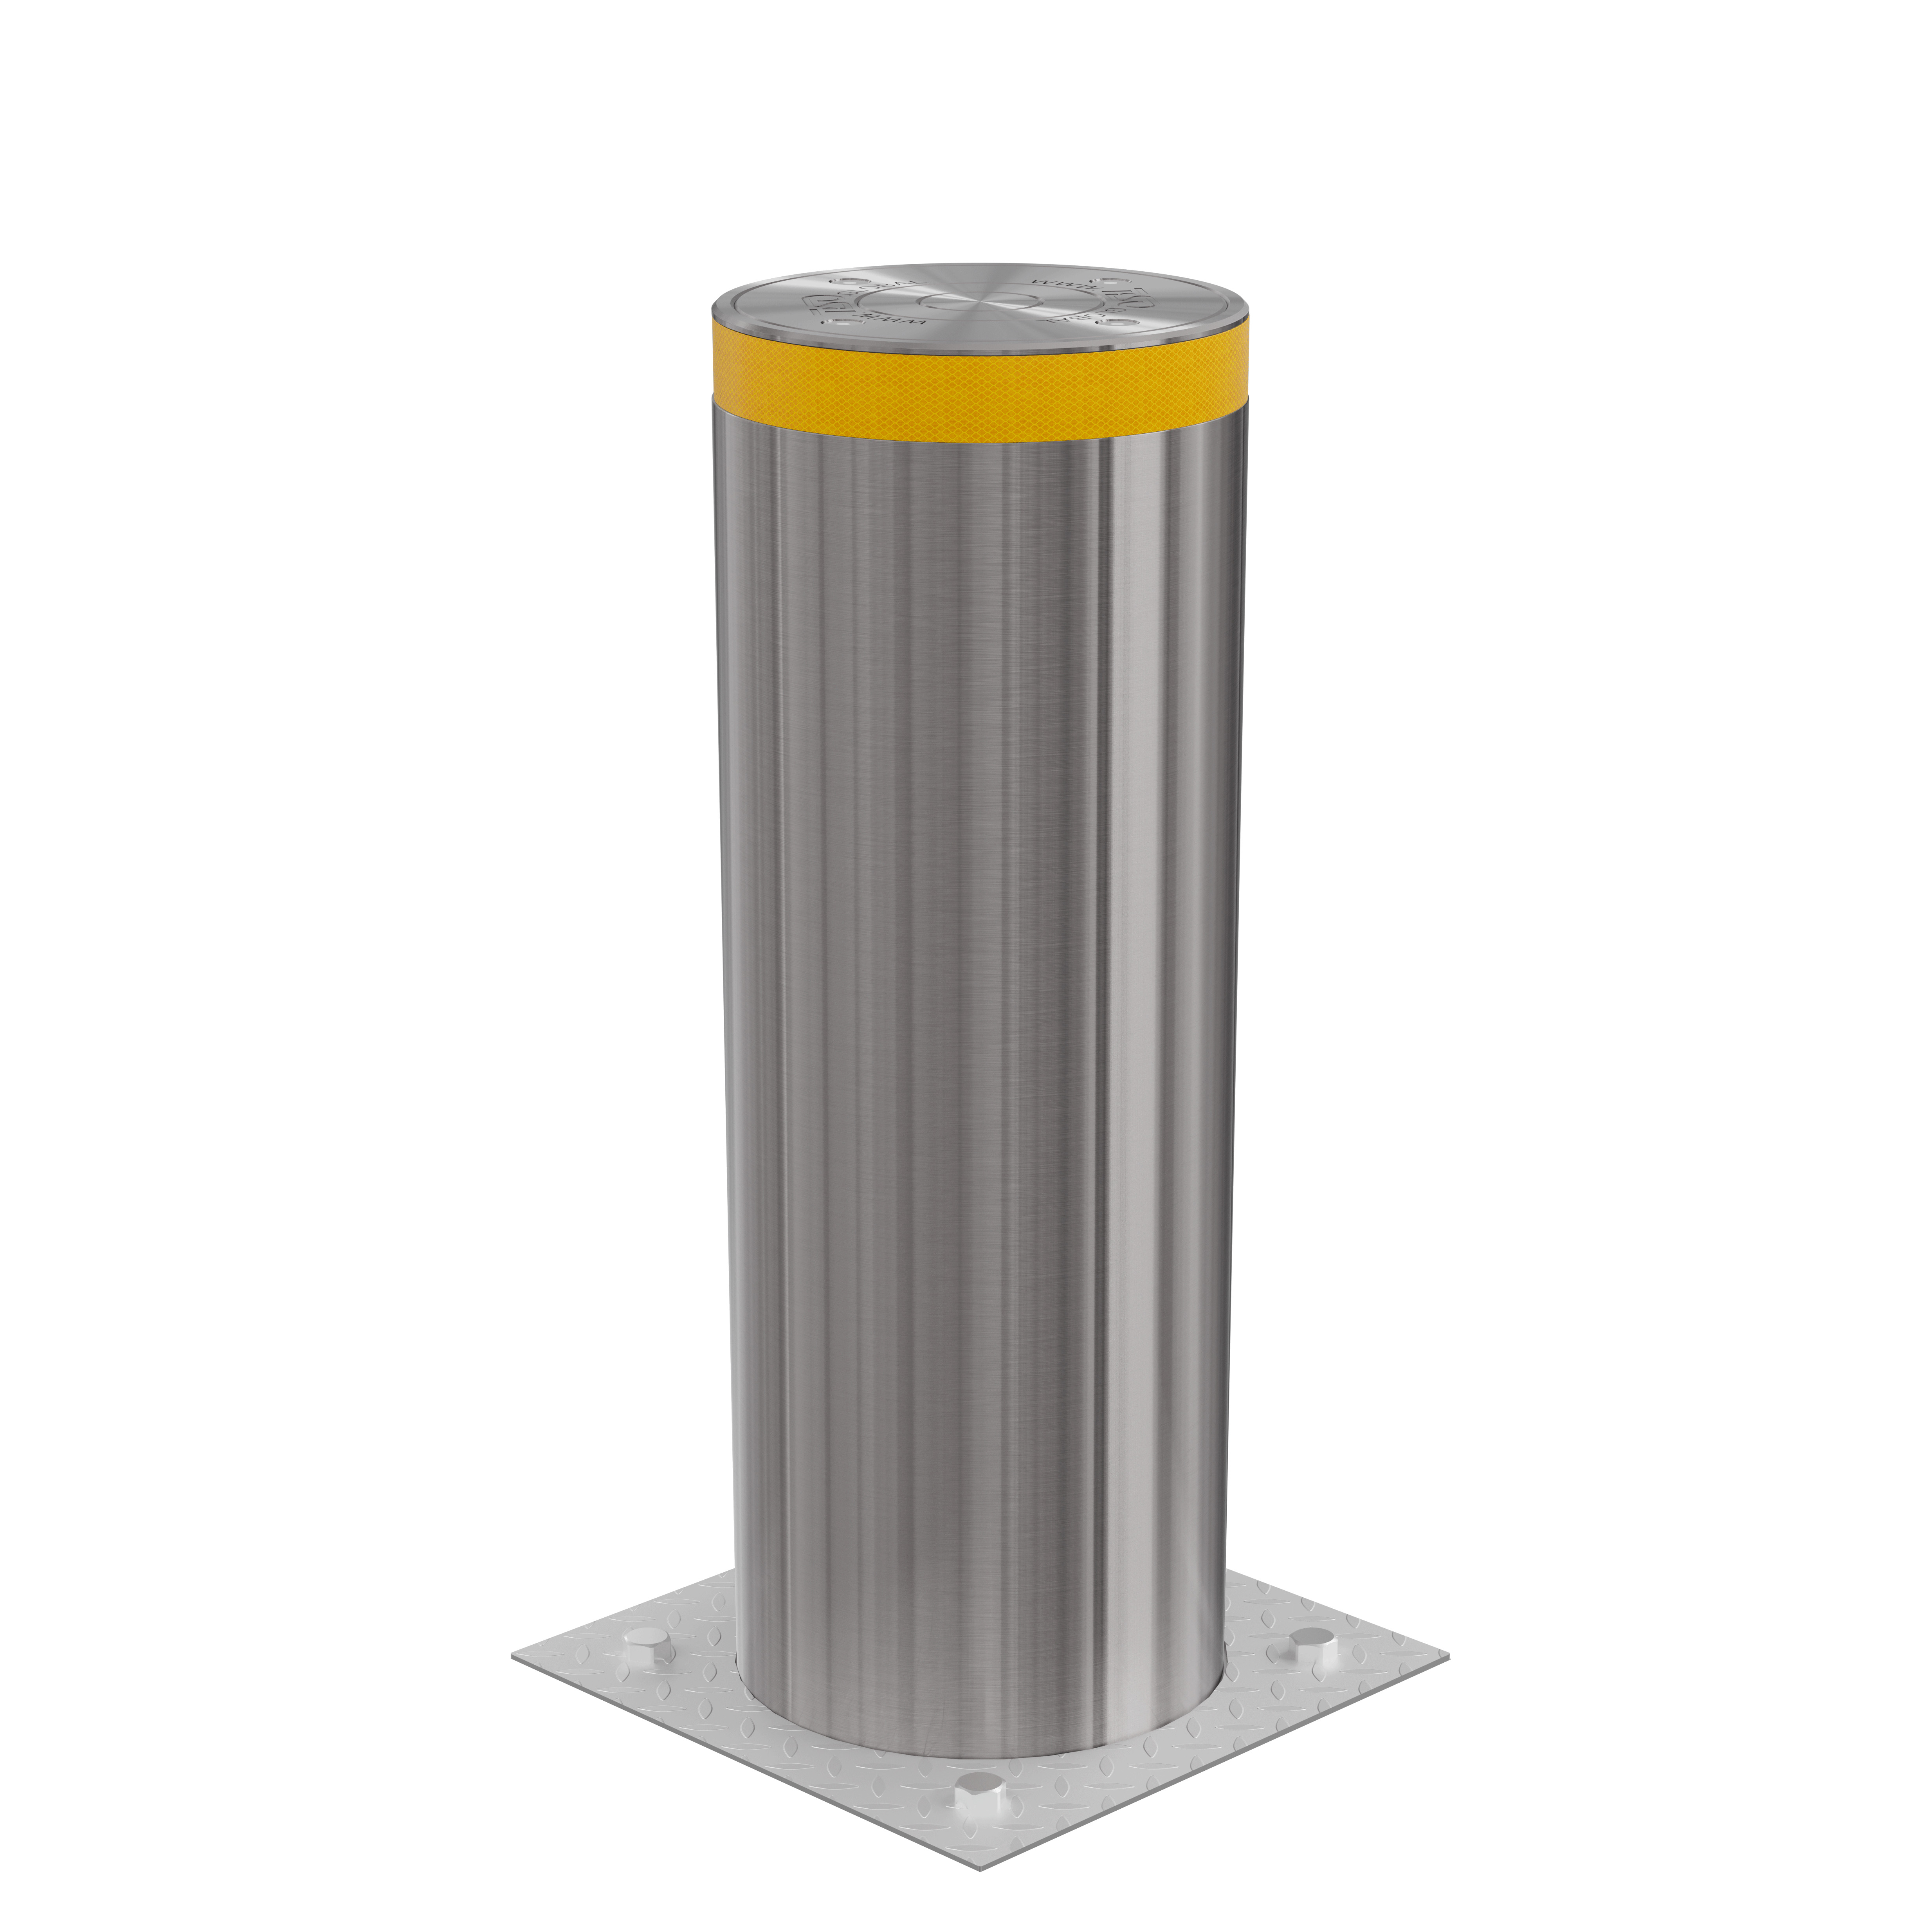 M40 HIGH SECURITY FIXED/REMOVABLE BOLLARDS